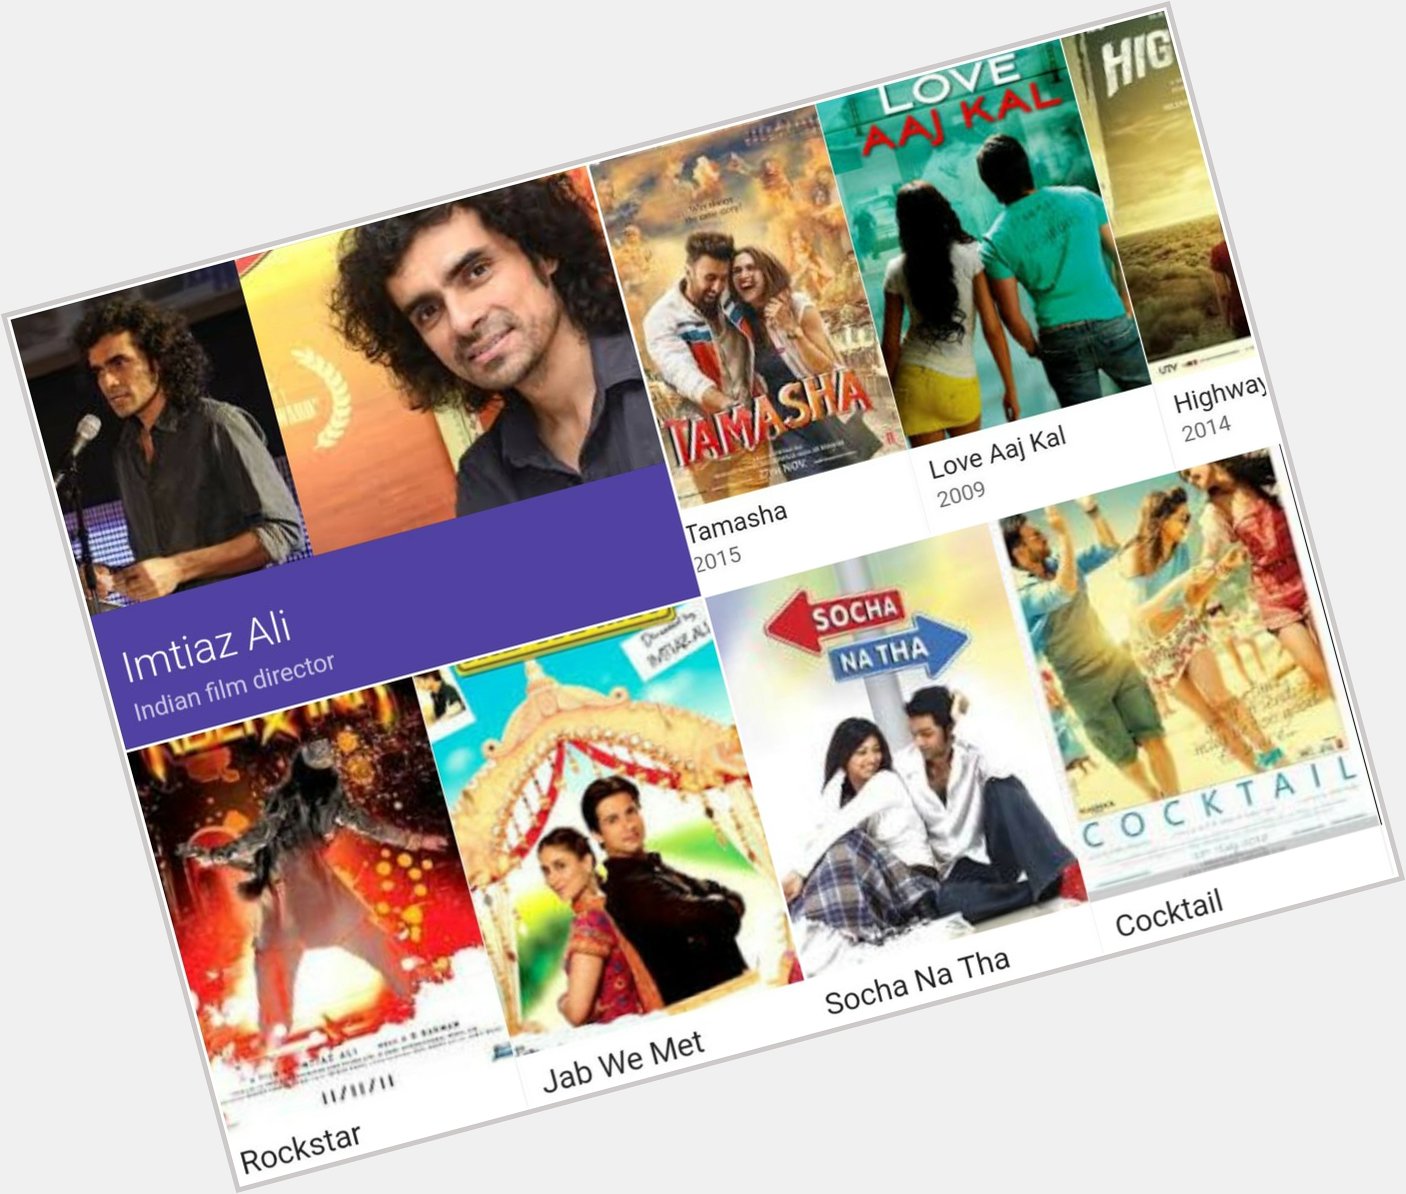  To the most amazing Director - Happy Bday Imtiaz Ali!
Thanks for giving such Amazing movies! 